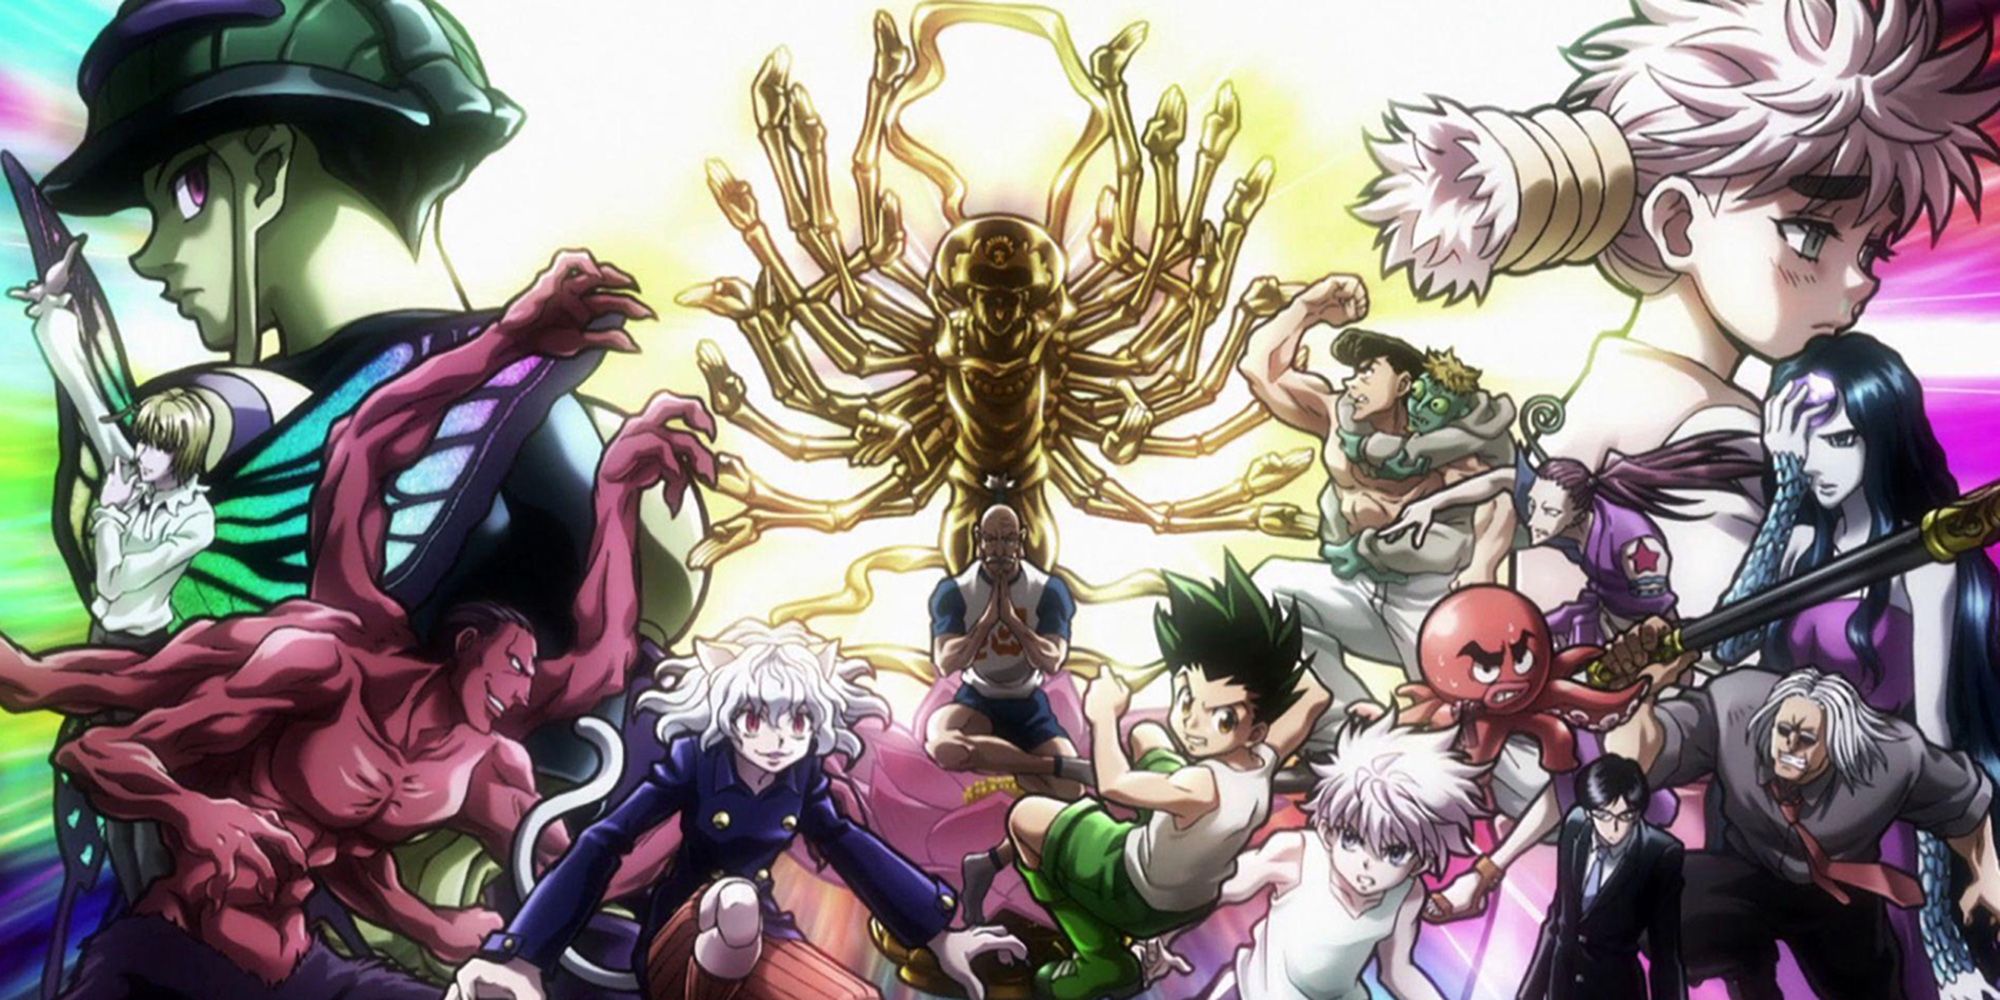 Cover Art For Hunter X Hunter Chimera Ant Art With All Main Cast For This Arc Featured